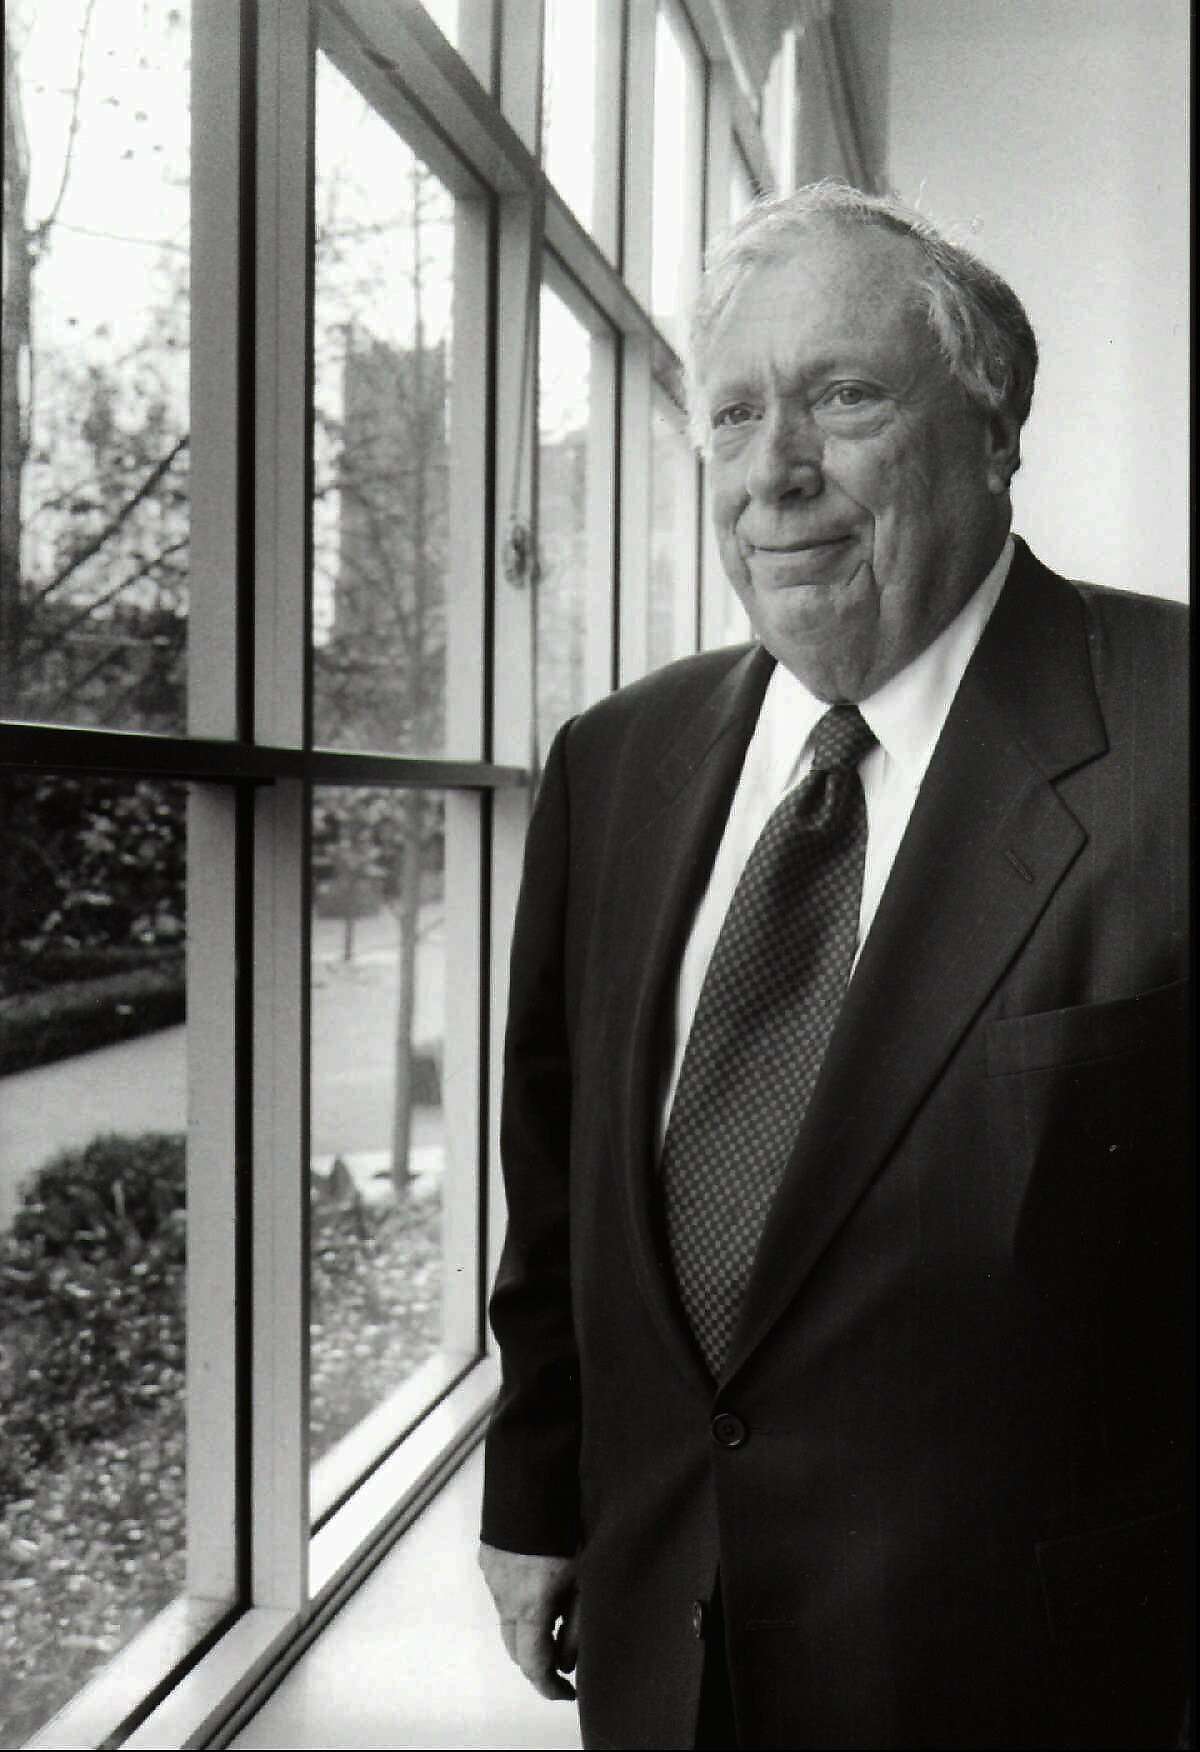 The 9th U.S. Circuit Court of Appeals Judge Stephen Reinhardt is shown in this 1997 photo. One of the nation's most liberal and outspoken federal judges, Reinhardt unapologeticaly says that judges should not change their view of the law "in order to please the Supreme Court".